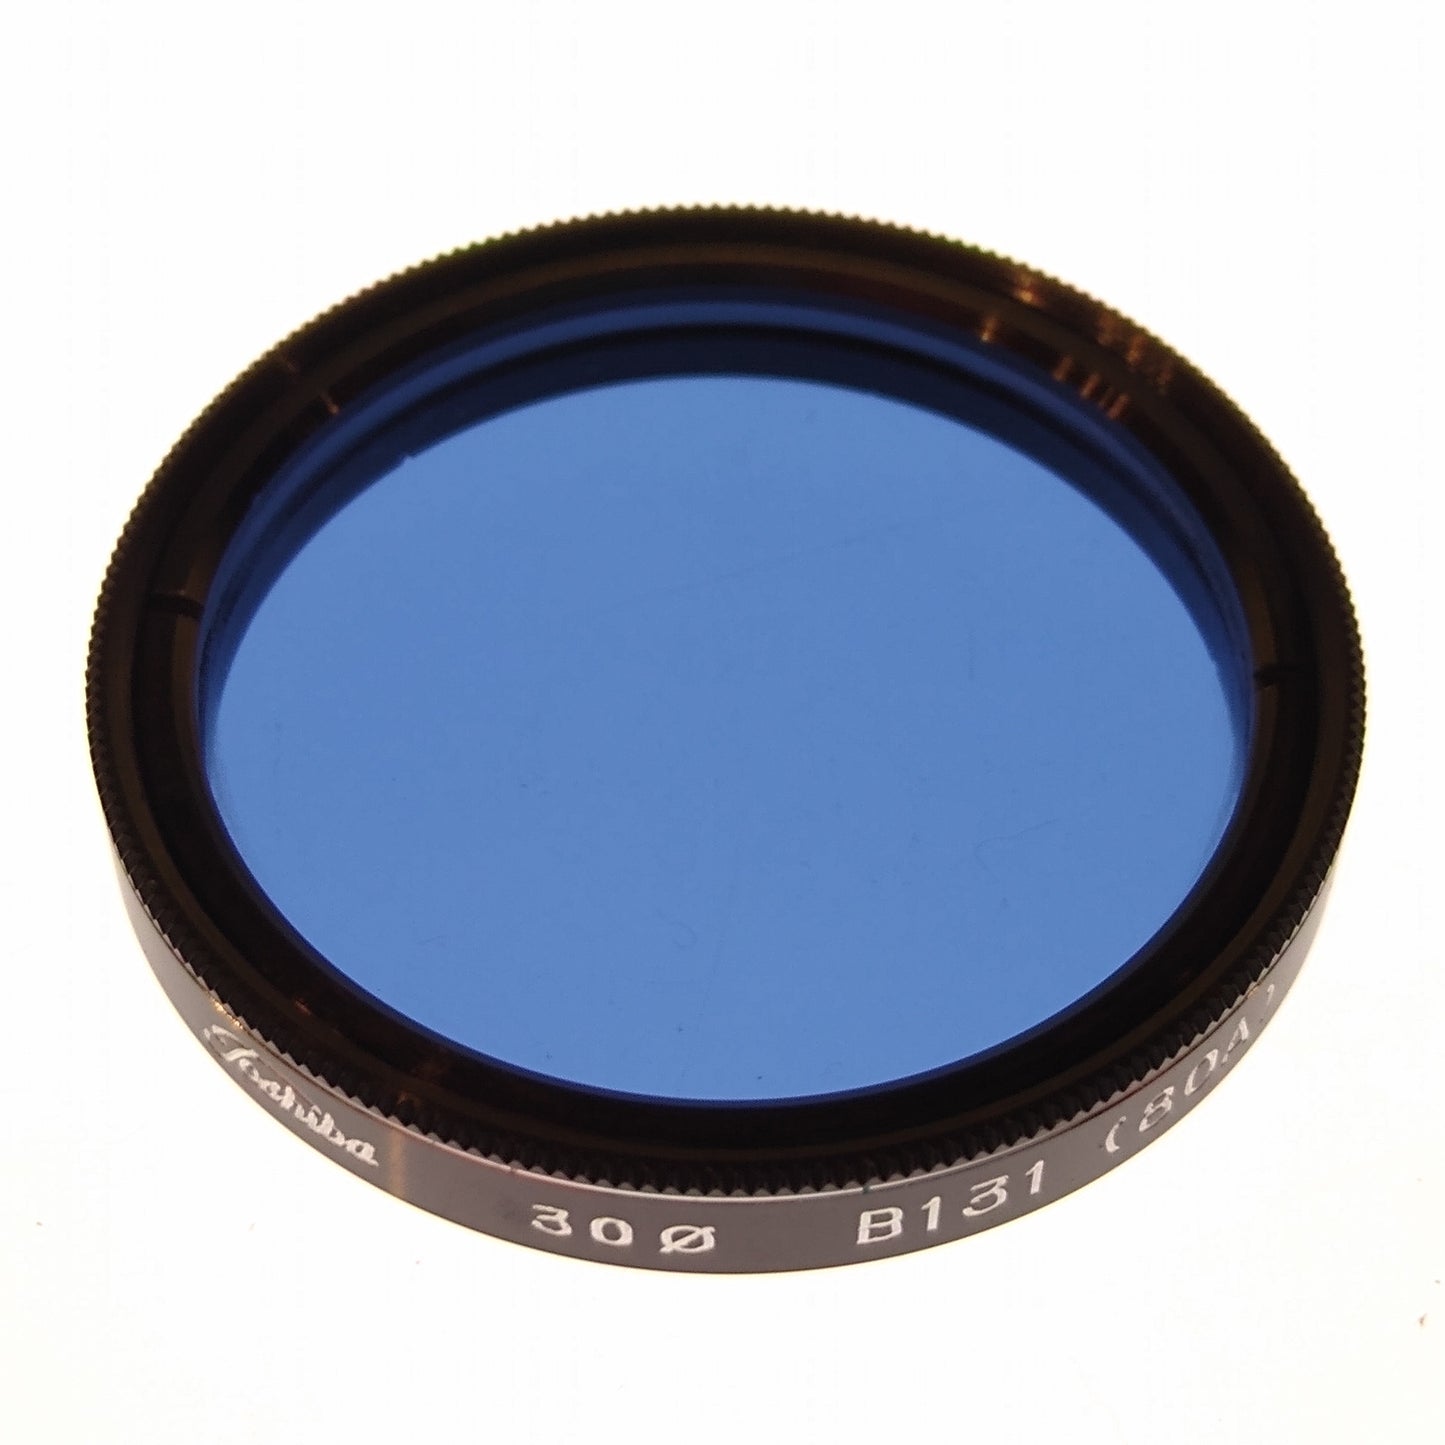 Toshiba B131 (80A) filter for Bay 1.